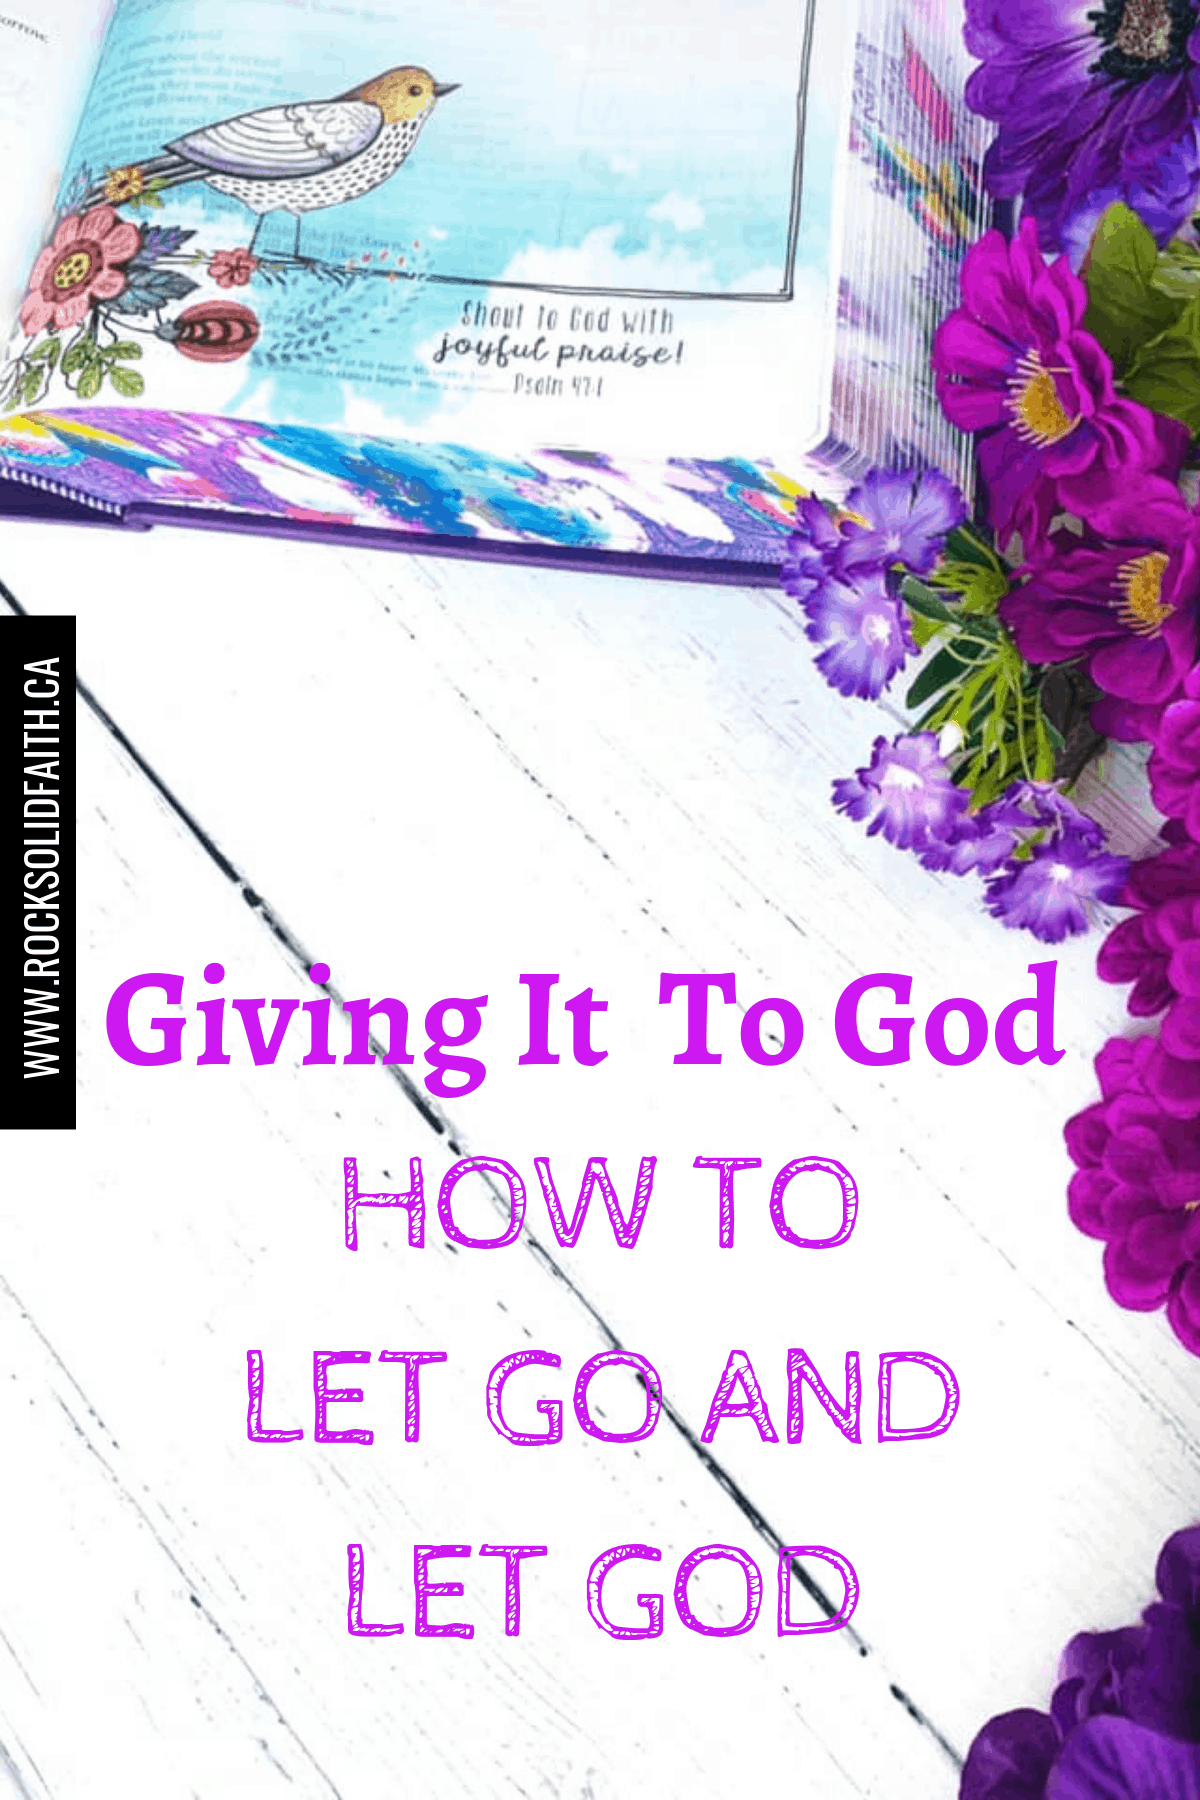 GIVING IT TO GOD: How to let go and let god